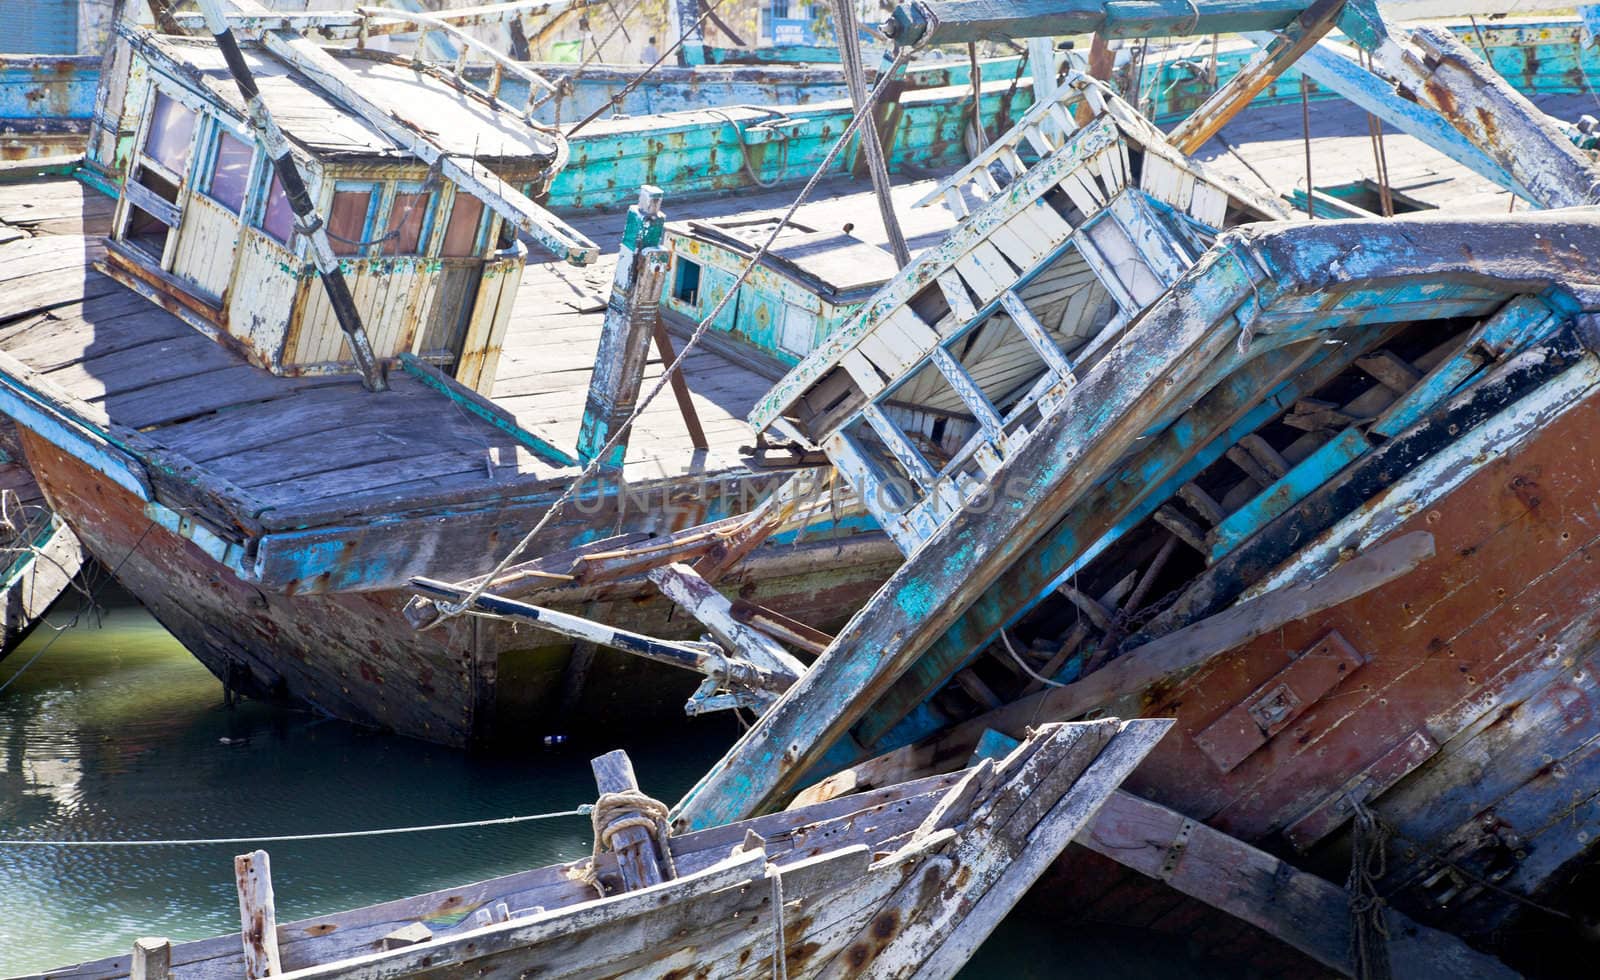 Dwarka Roadtrip. Boat graveyard in Gujarat India of wooden shipping that has been shipwrecked or taken out of service